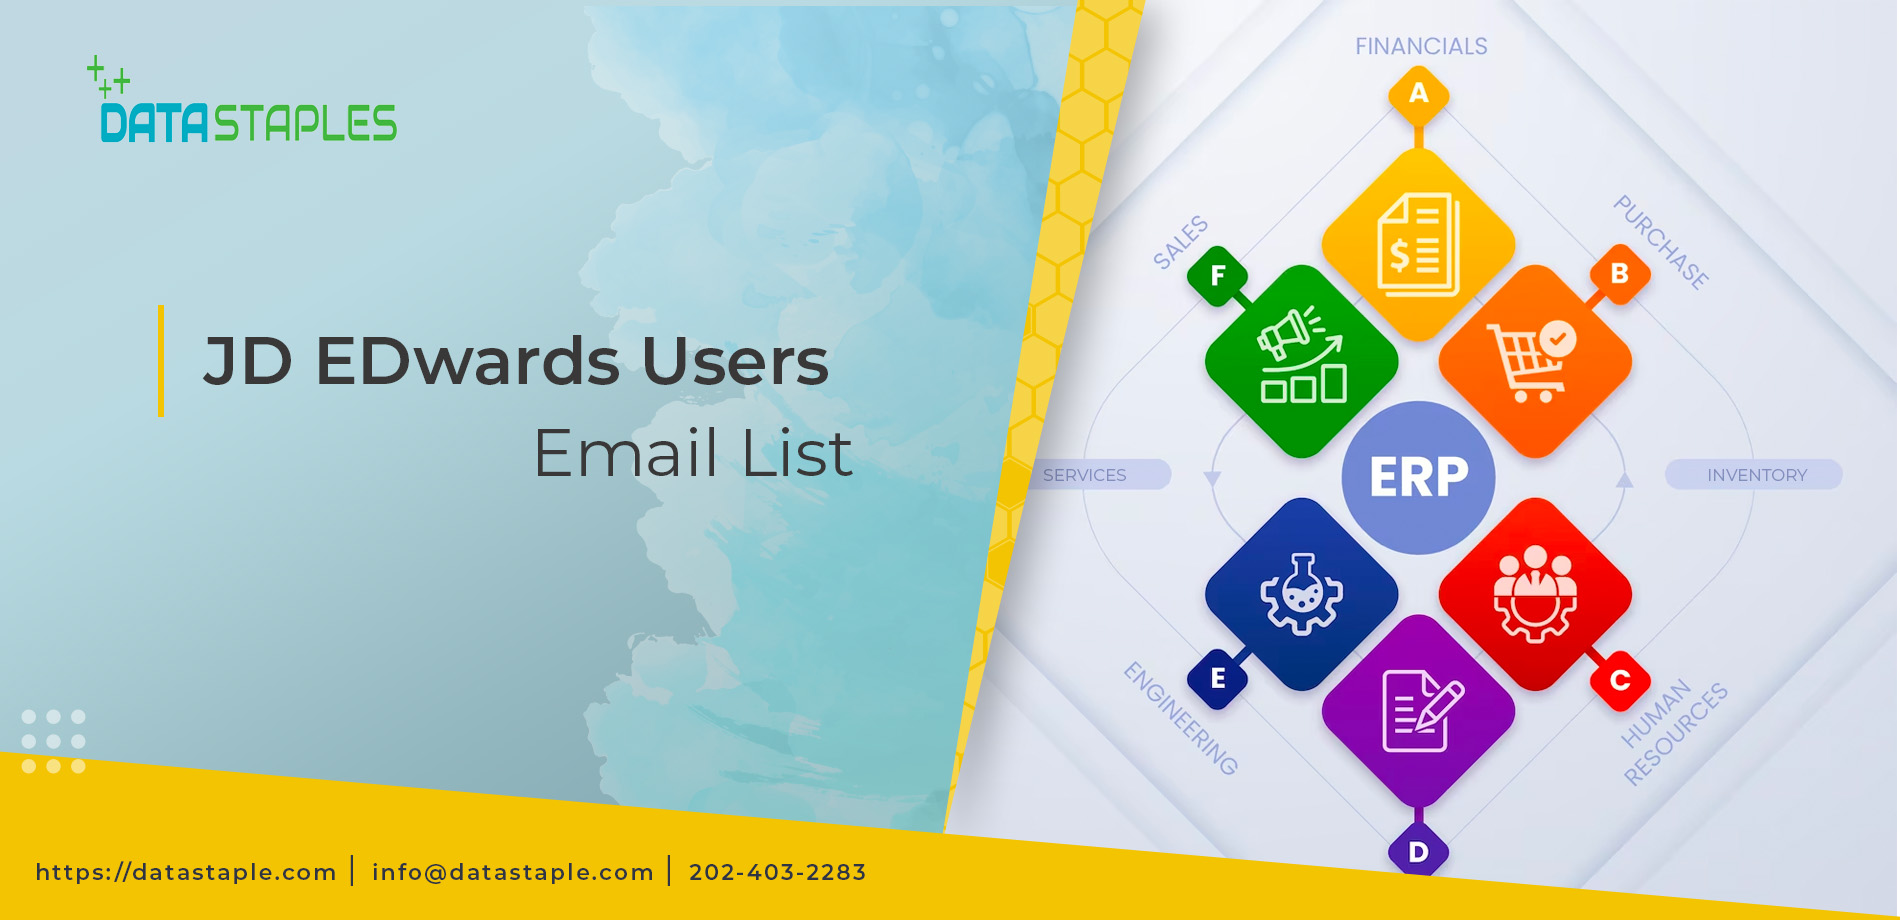 JD Edwards Users Email List | DataStaples